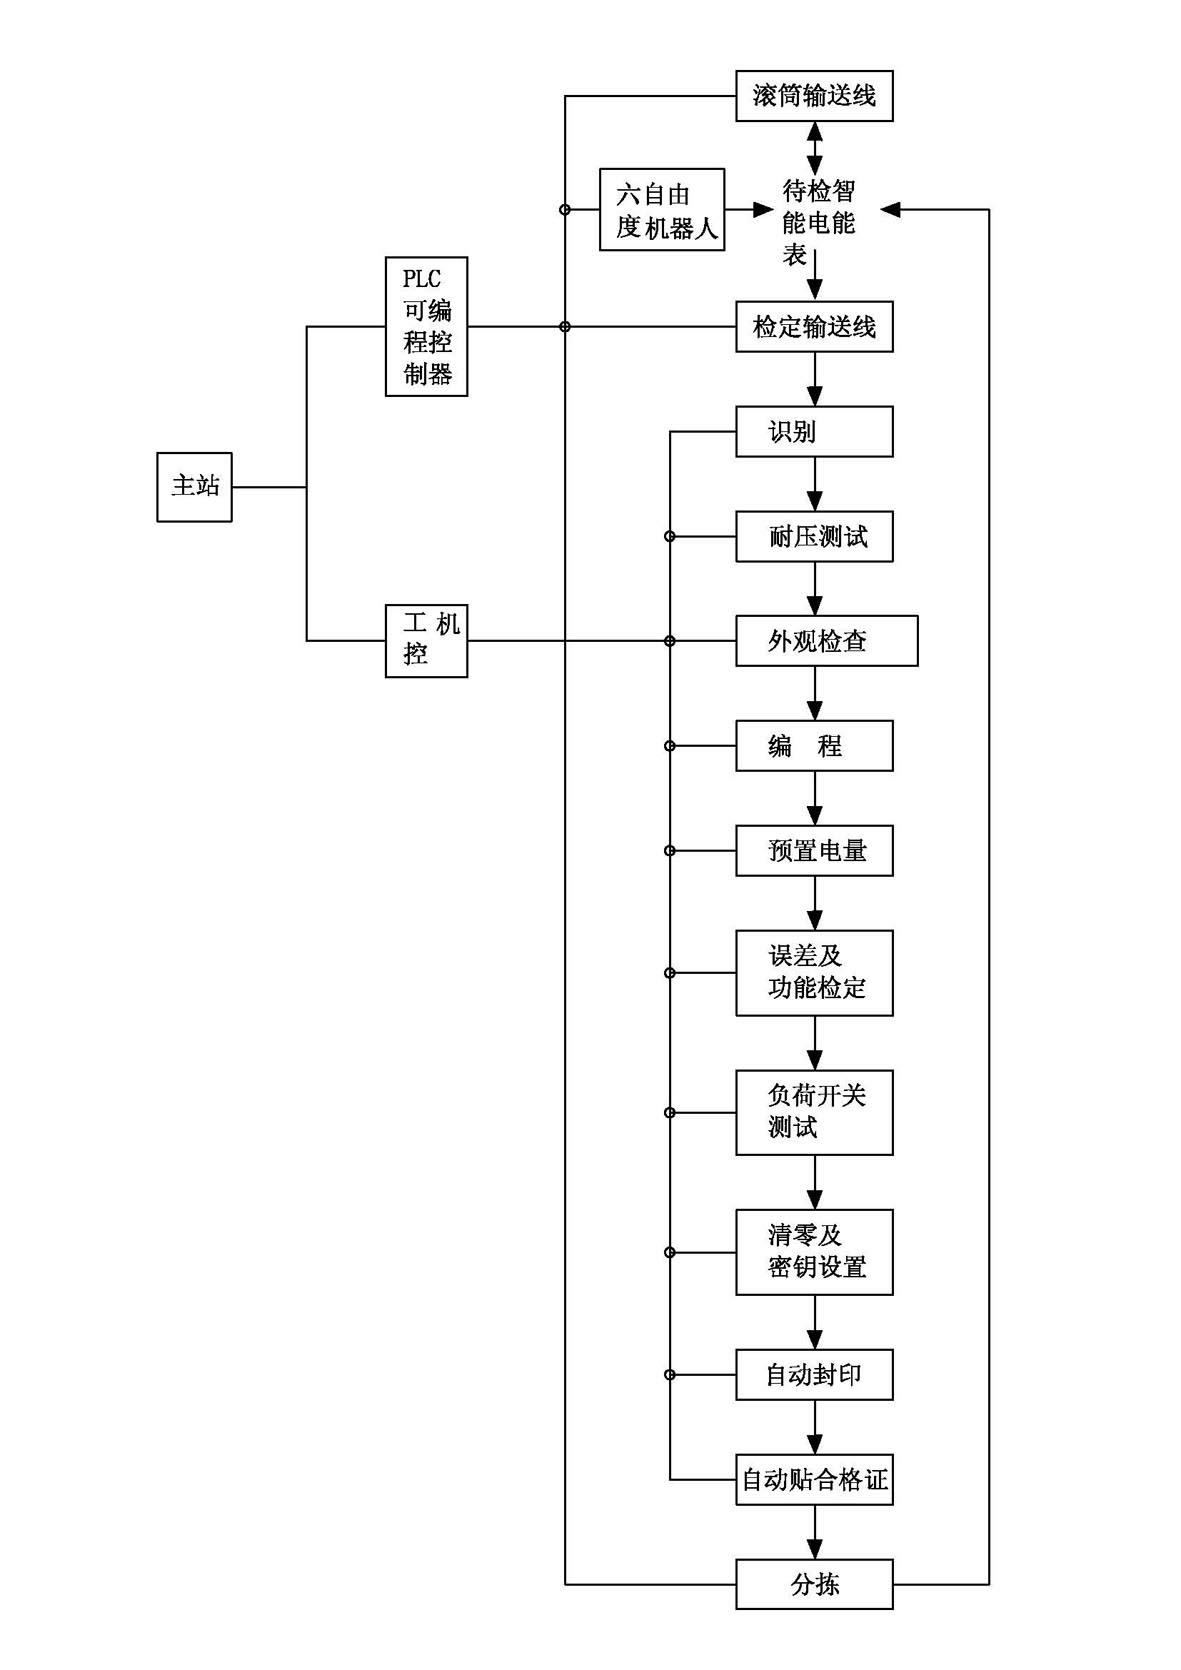 Automatic verification system and method for single-phase intelligent watt-hour meter